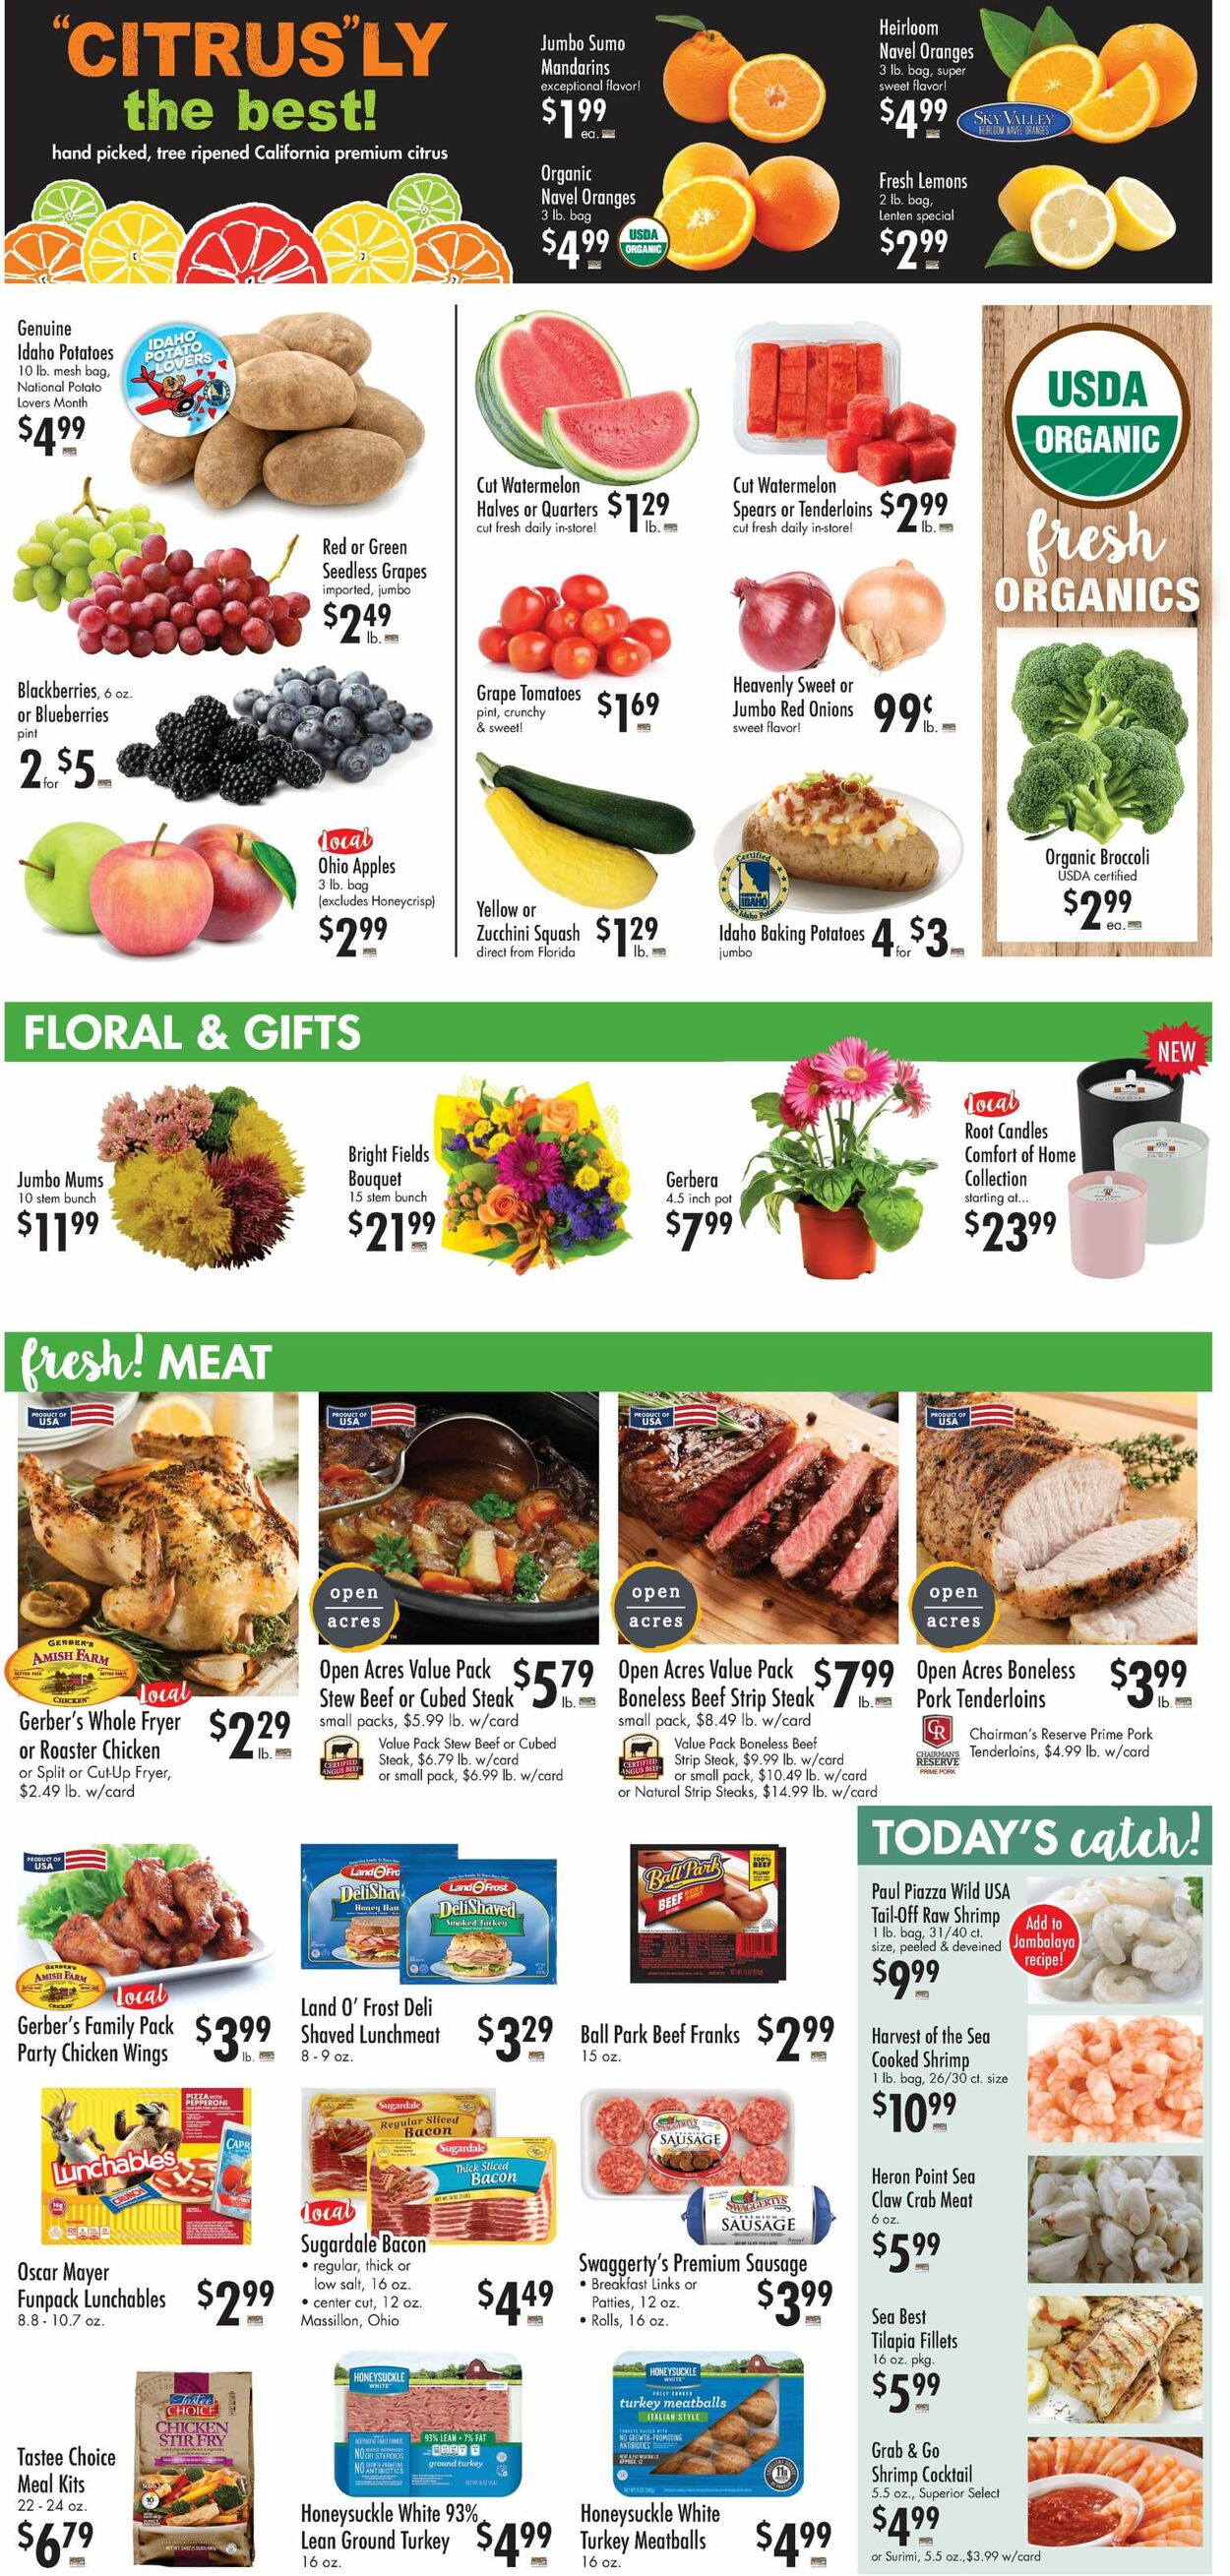 Buehler's Fresh Foods Ad from 02/15/2023